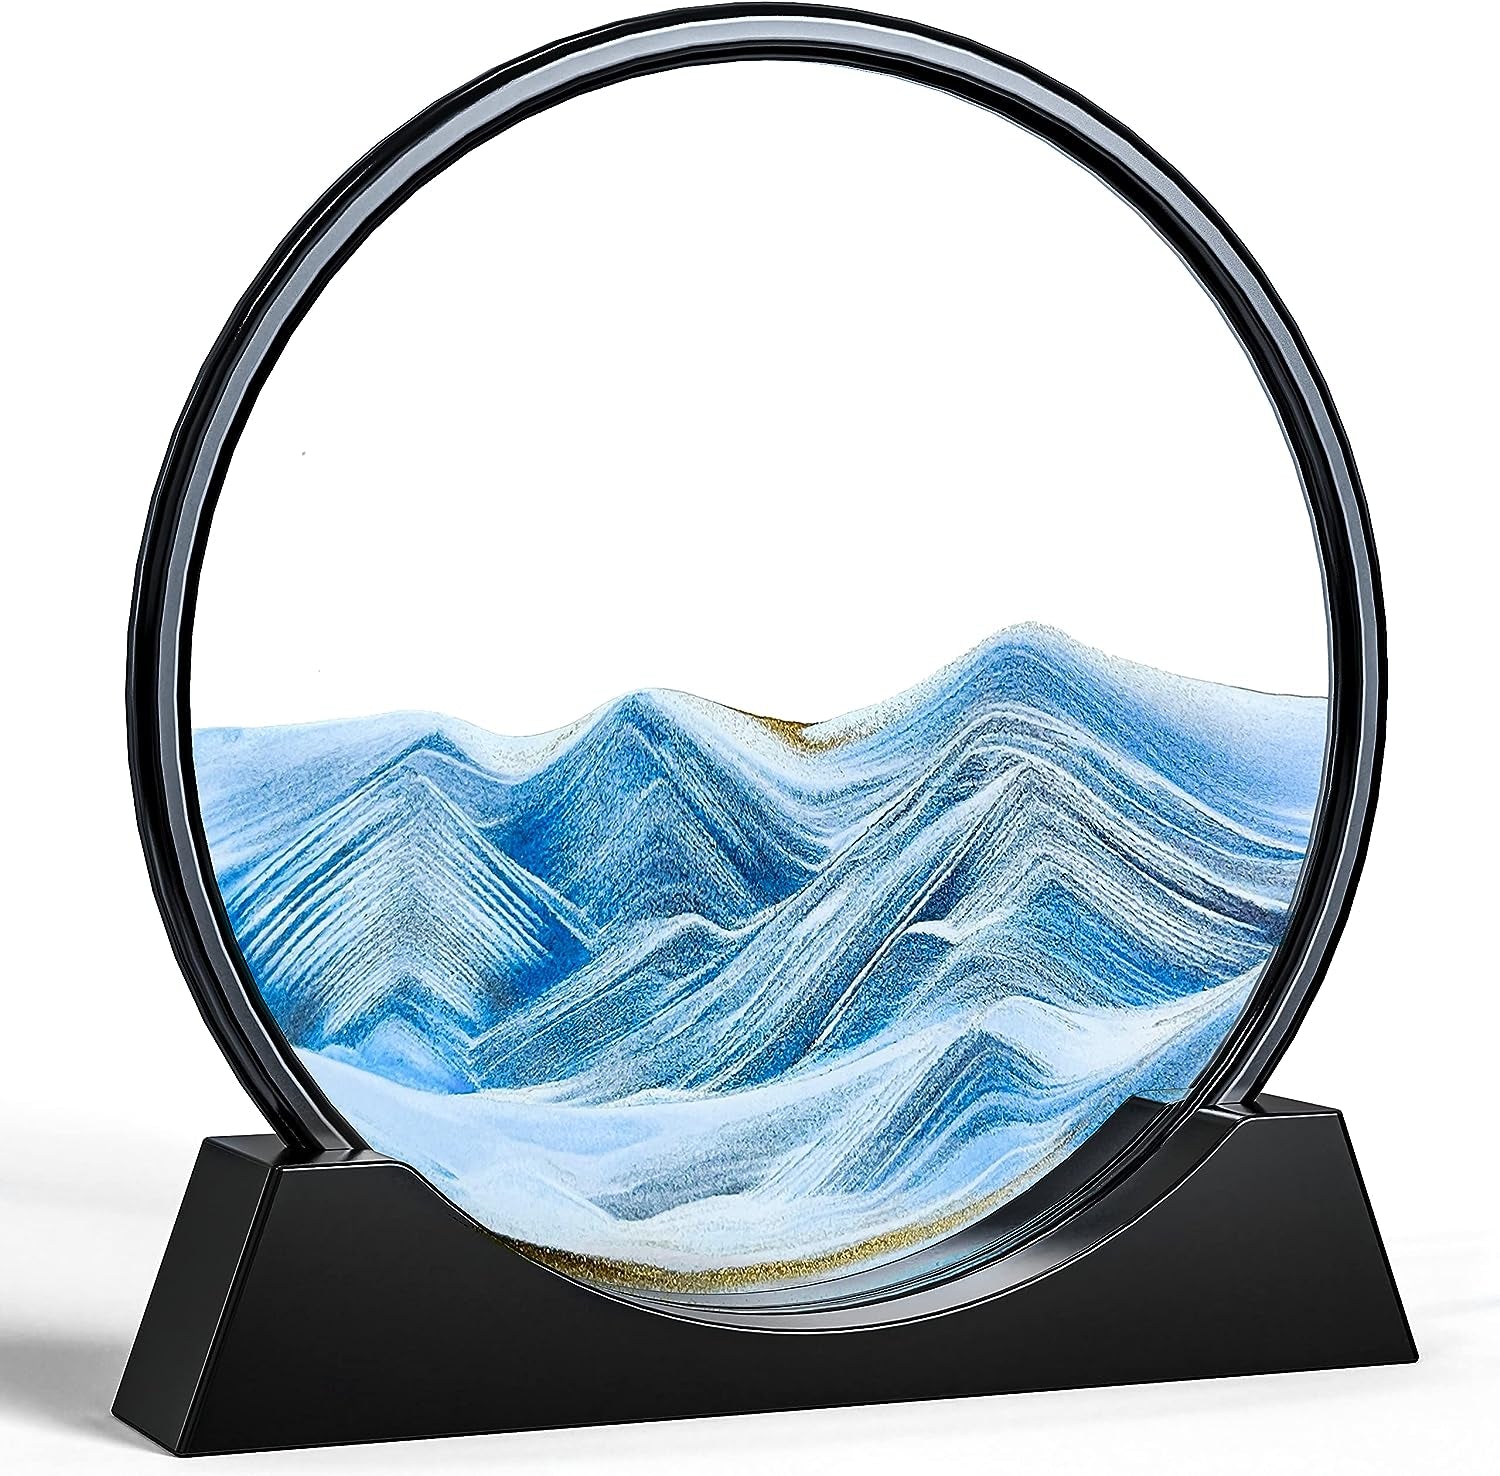 Moving Sand Art Picture Sandscapes in Motion round Glass 3D Deep Sea Sandscape in Motion Display Flowing Sand Frame Relaxing Home Office Decoration (12In, Blue)